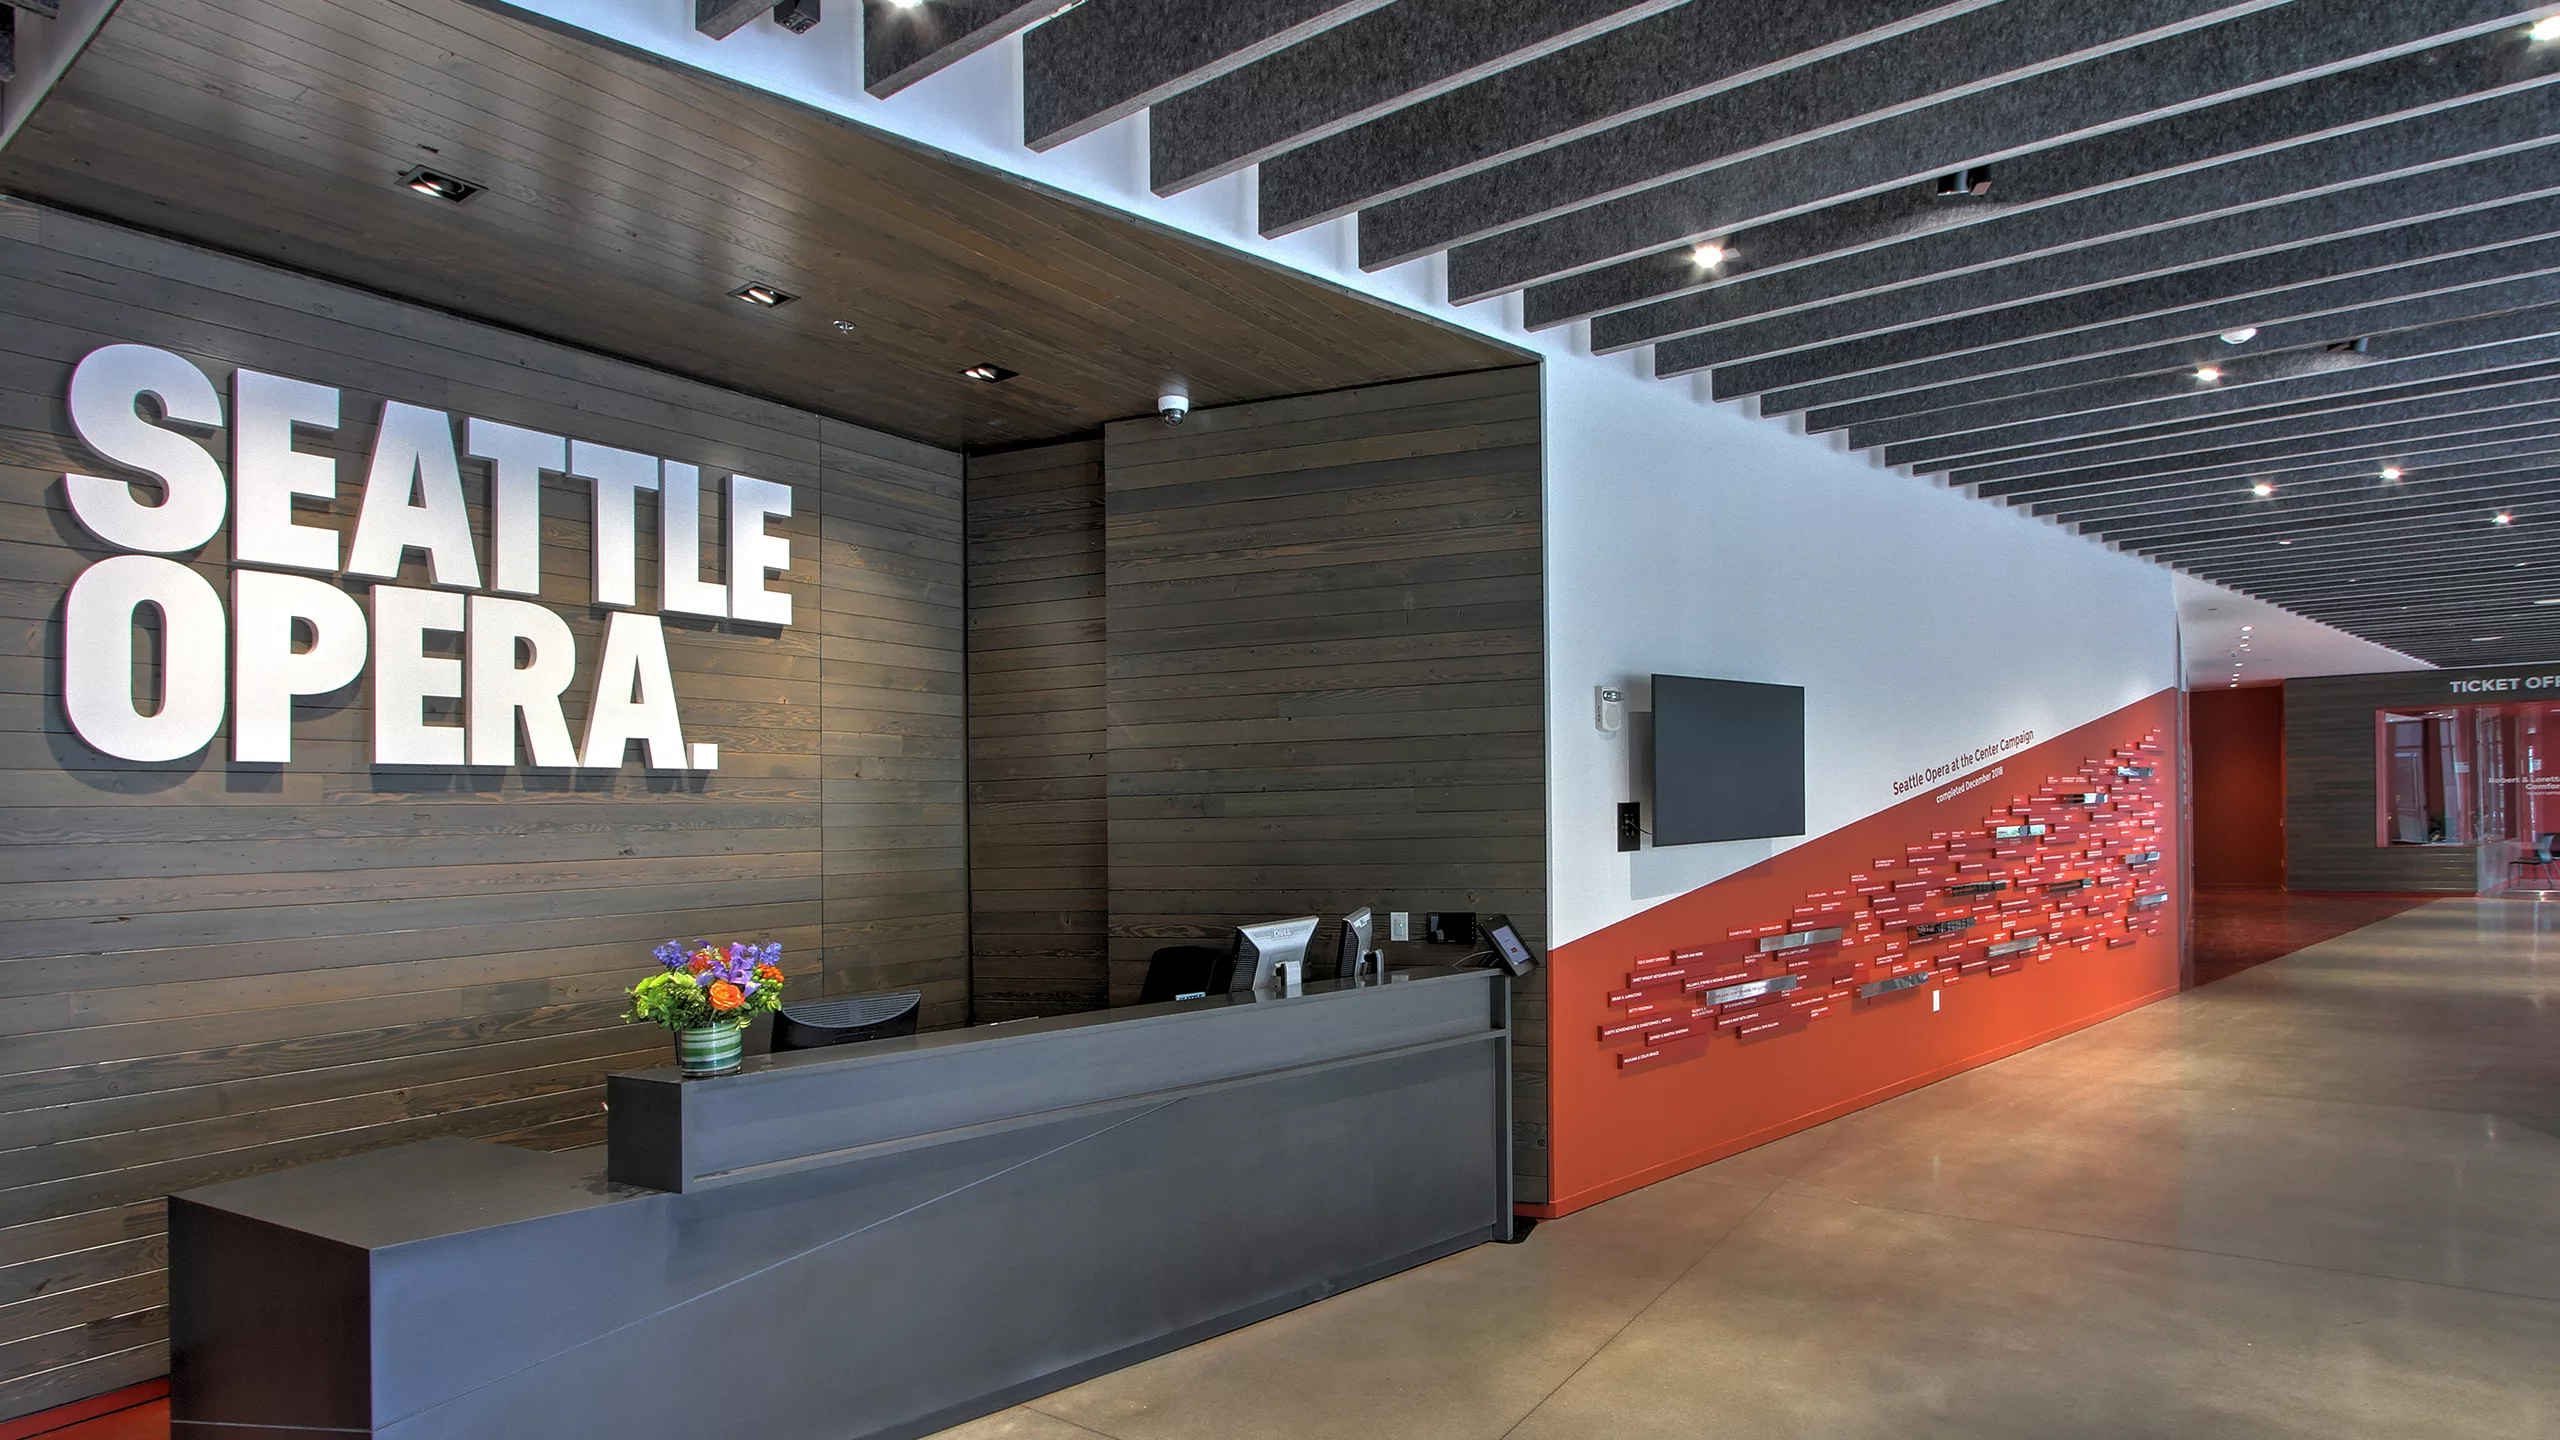 Interior view of the Seattle Opera Expansion's lobby and reception desk